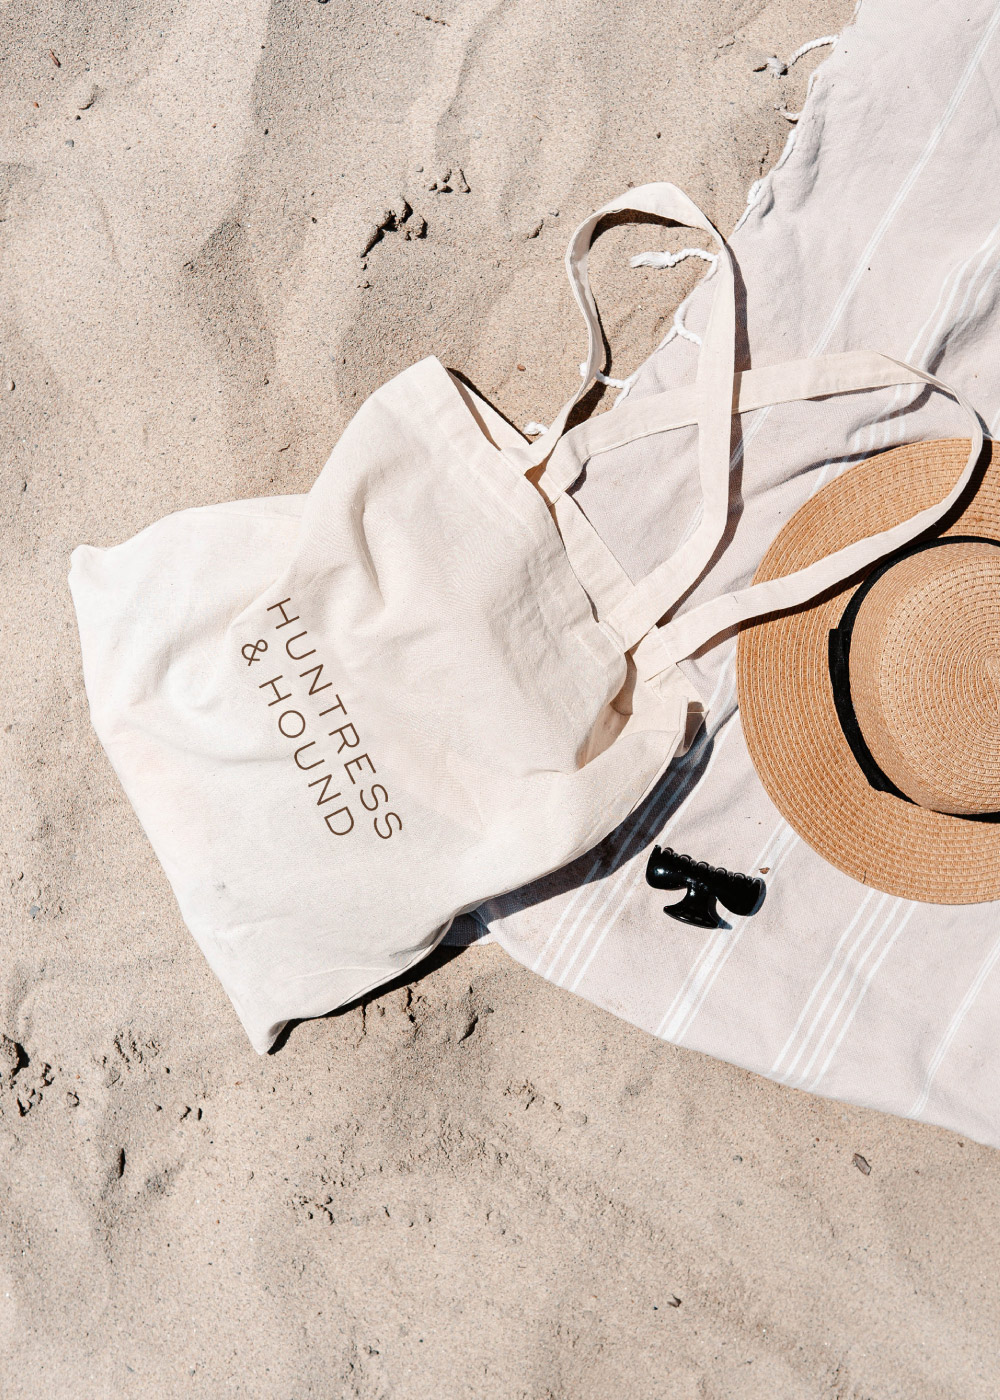 Tote bag on the beach with Huntress and Hound logo